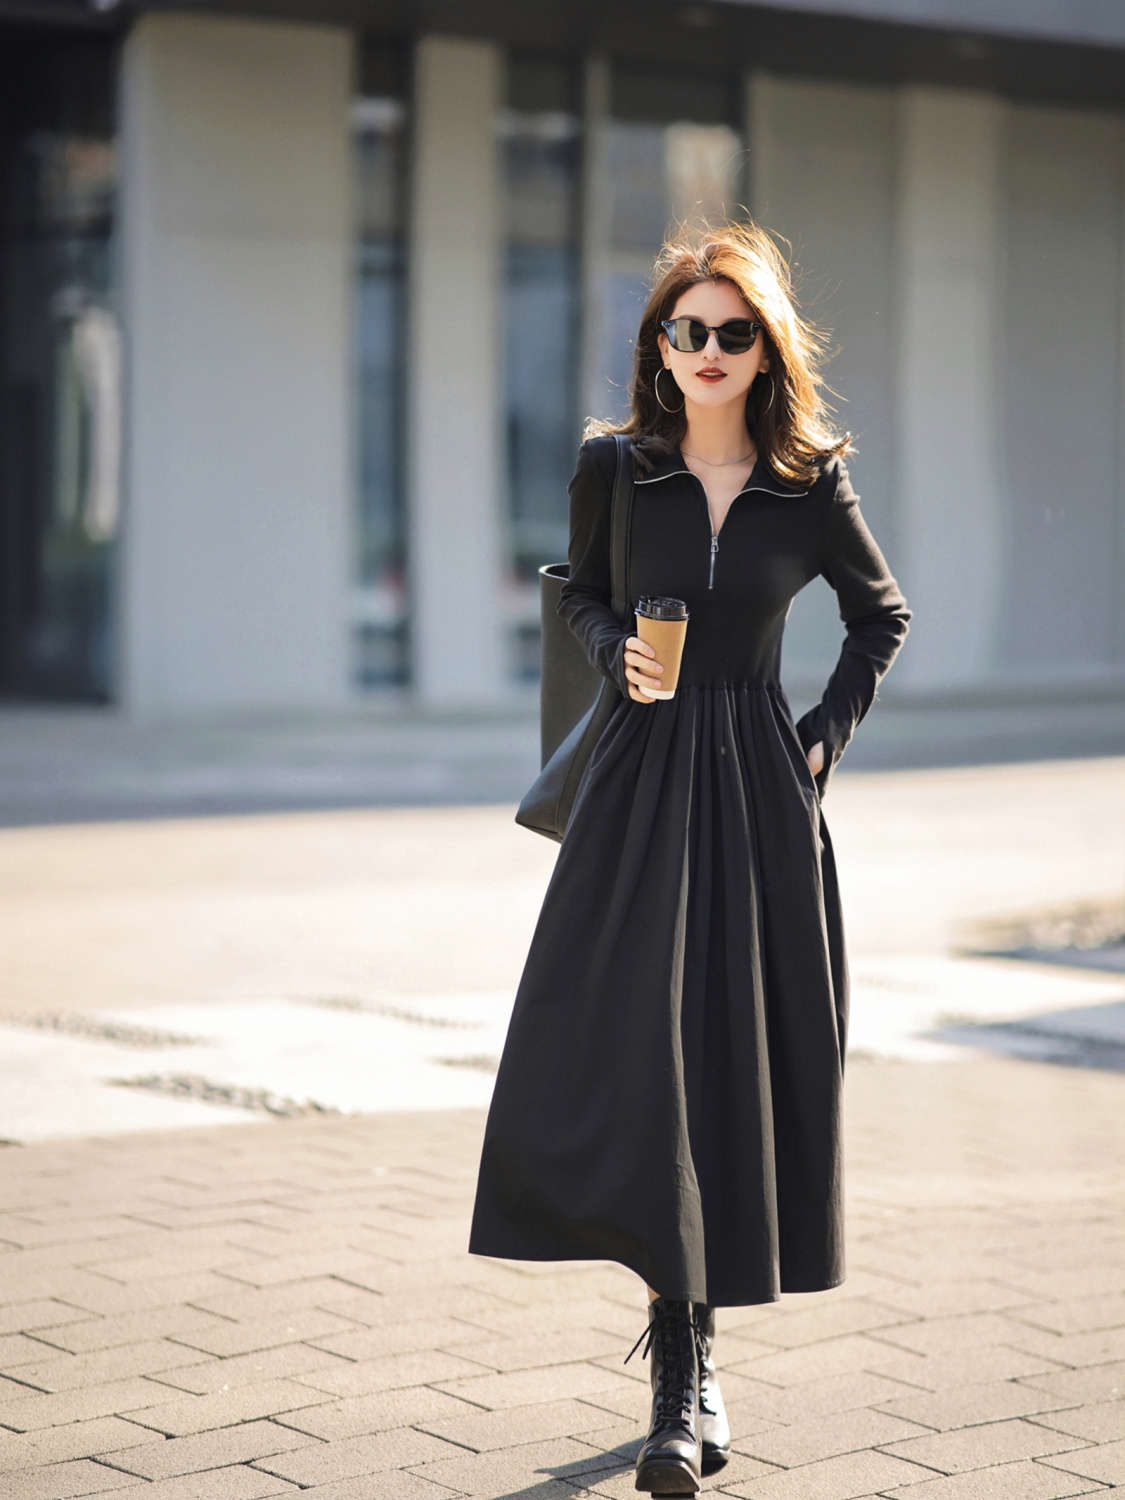 Xiaozi a bottle of magic water skirt black high-necked knitted dress spring waist bottoming skirt temperament long section looks thin